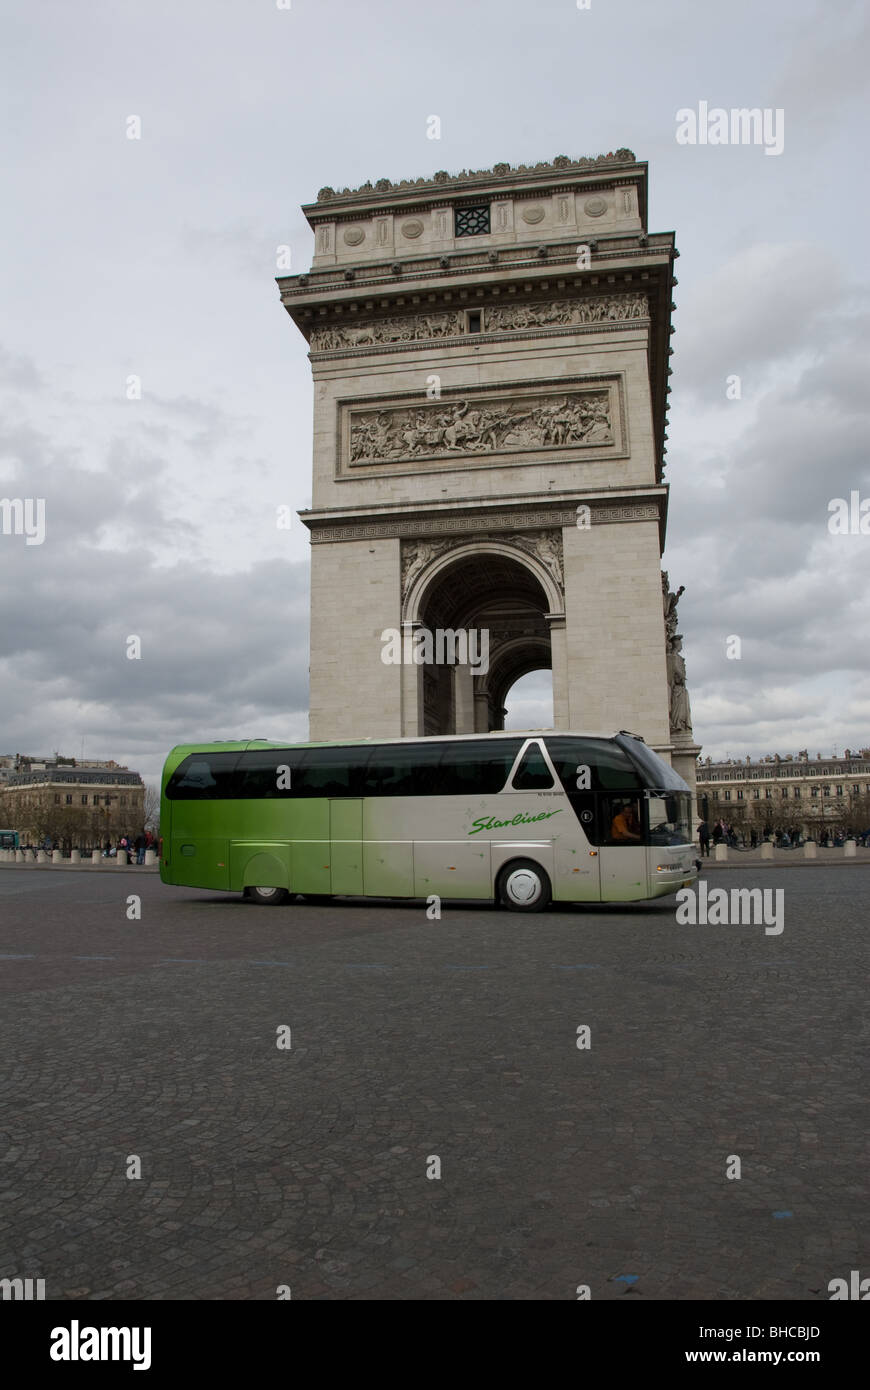 A Neoplan Starliner coach drives around the Place de l'Etoile passing the Arc de Triomphe in Paris, France Stock Photo